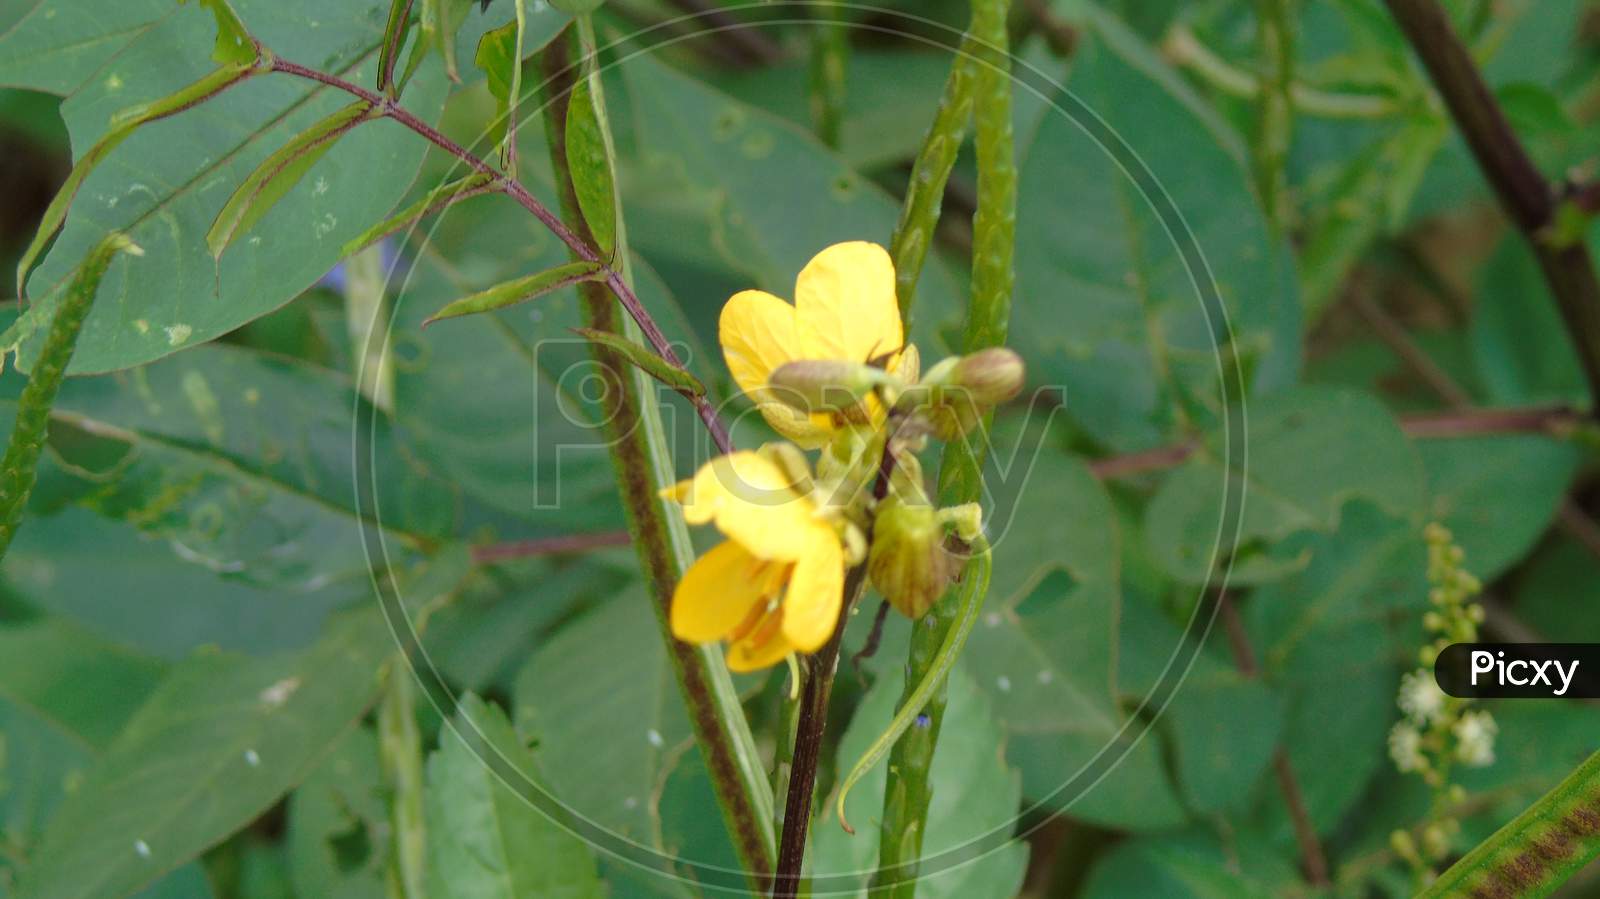 green plant with yellow flower,